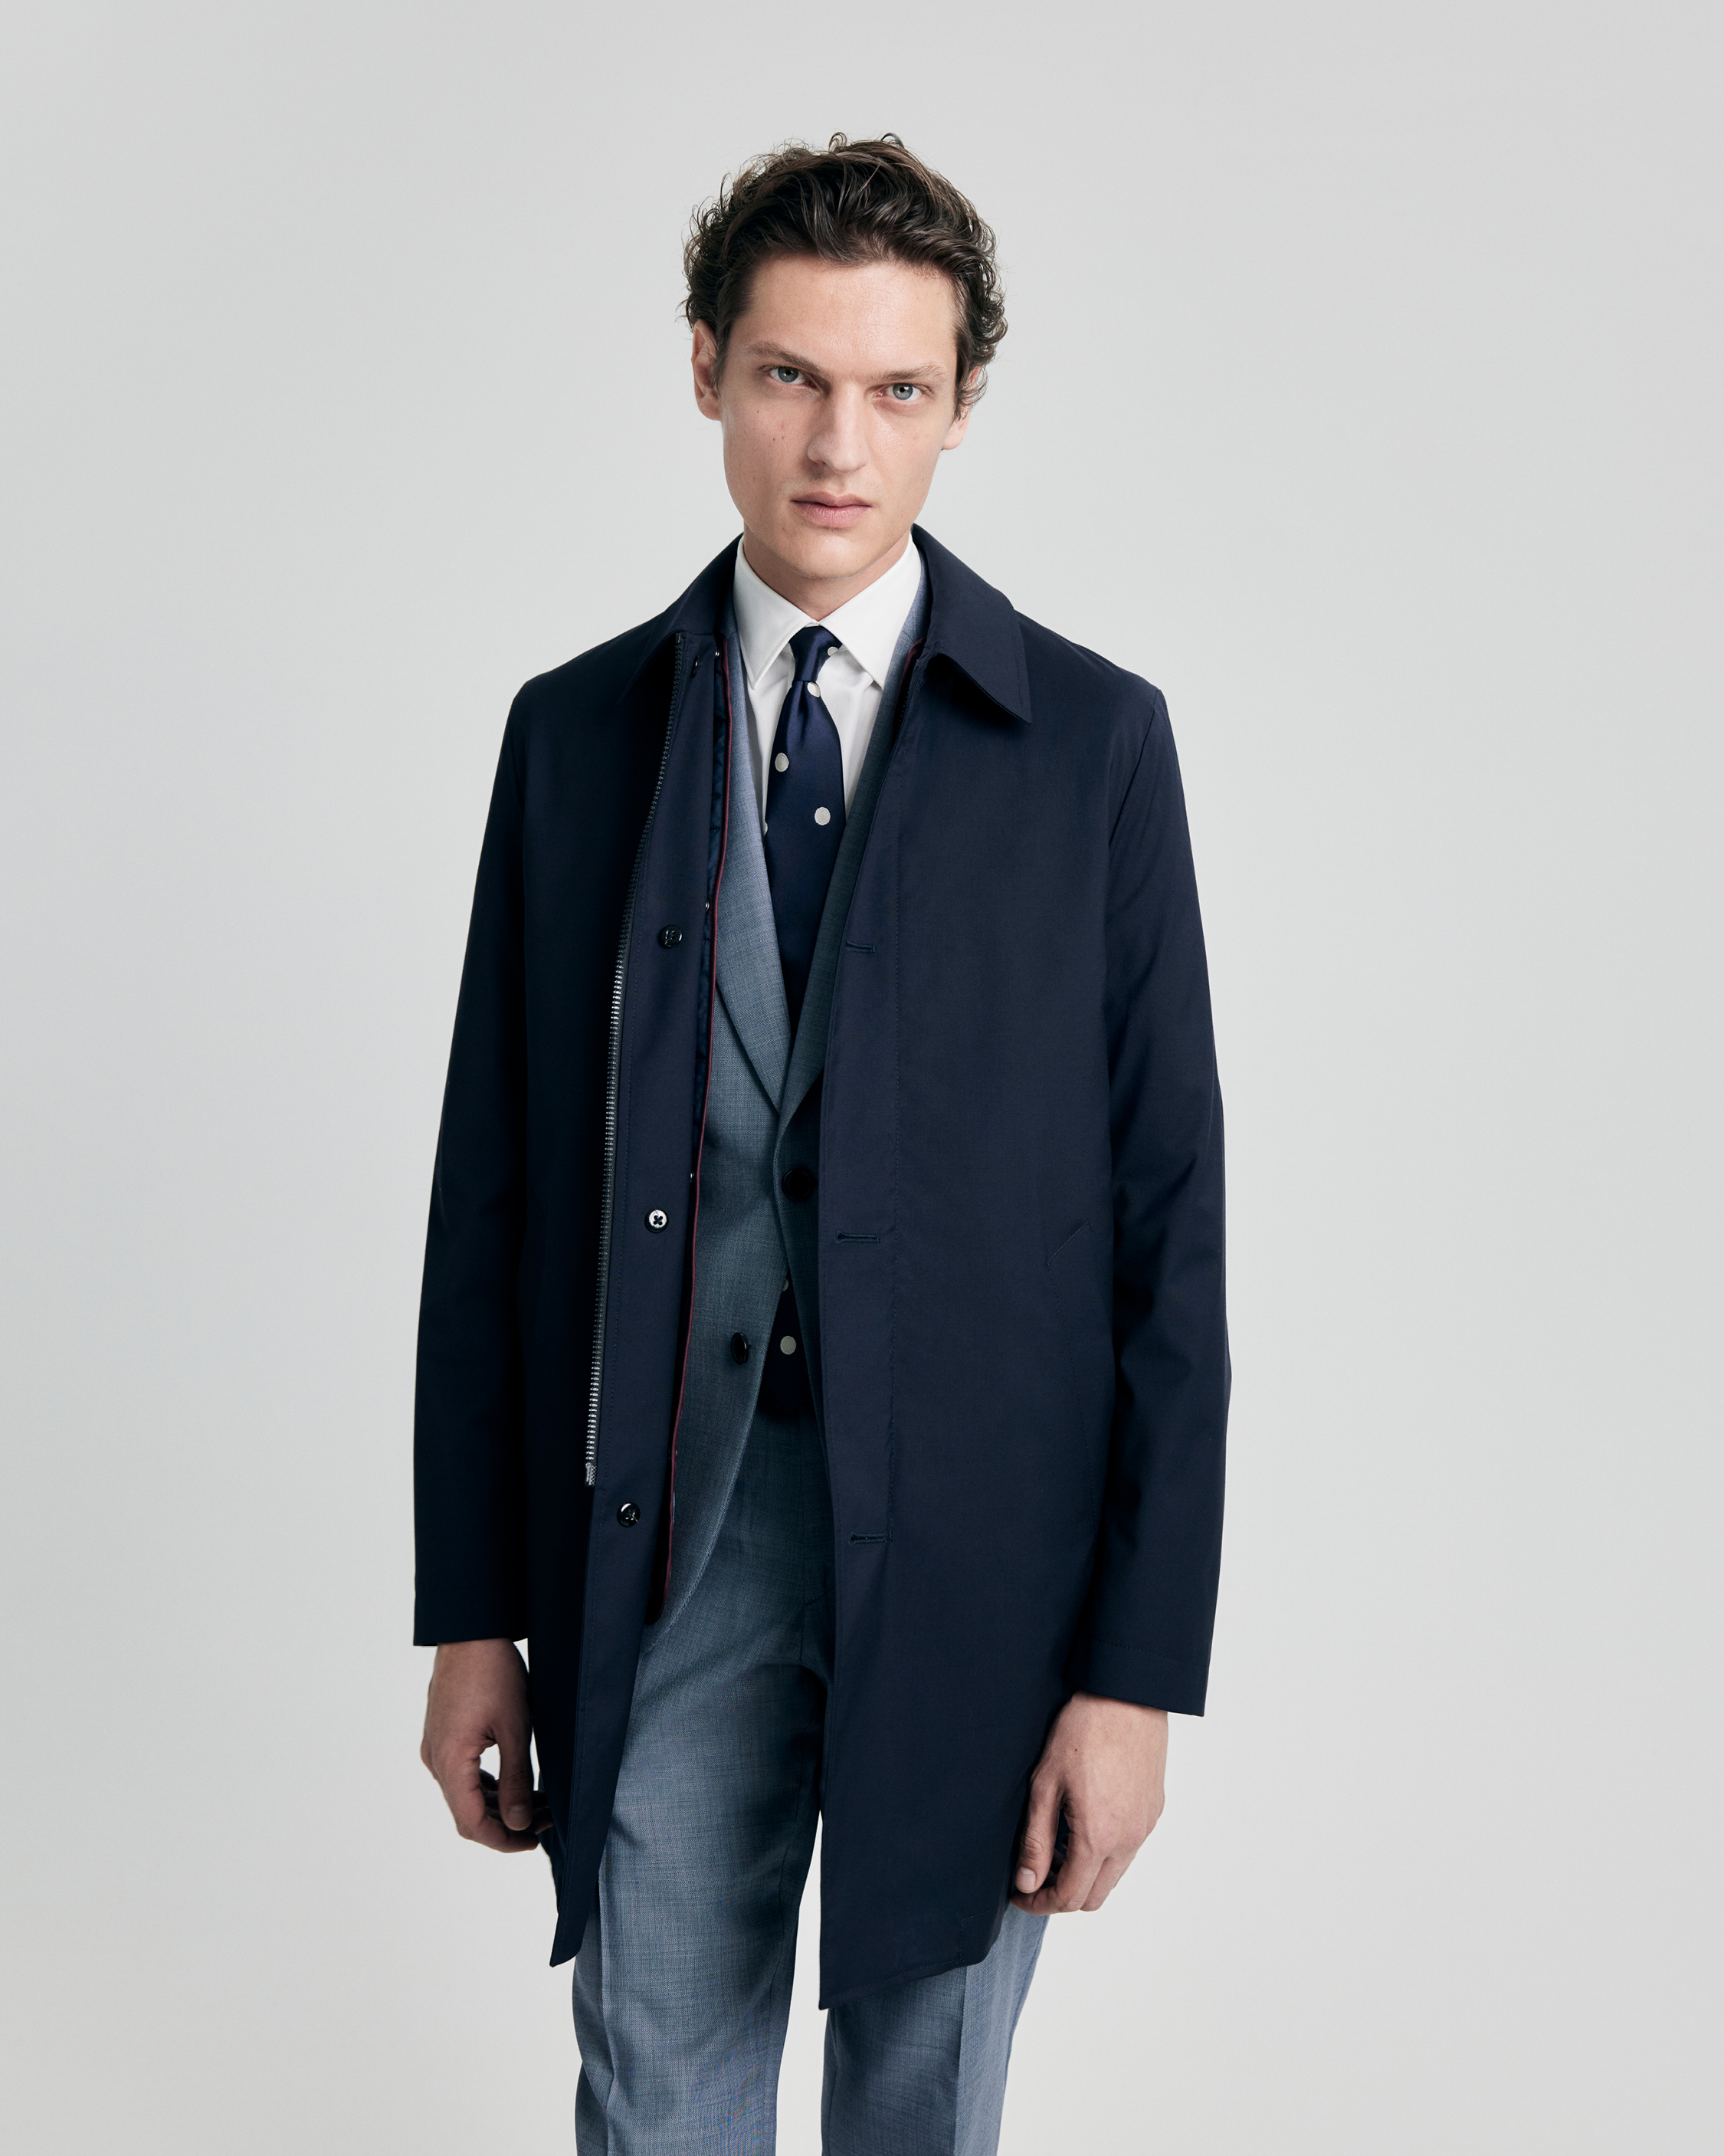 Designer Clothing, Shoes & Accessories For Him | Paul Smith